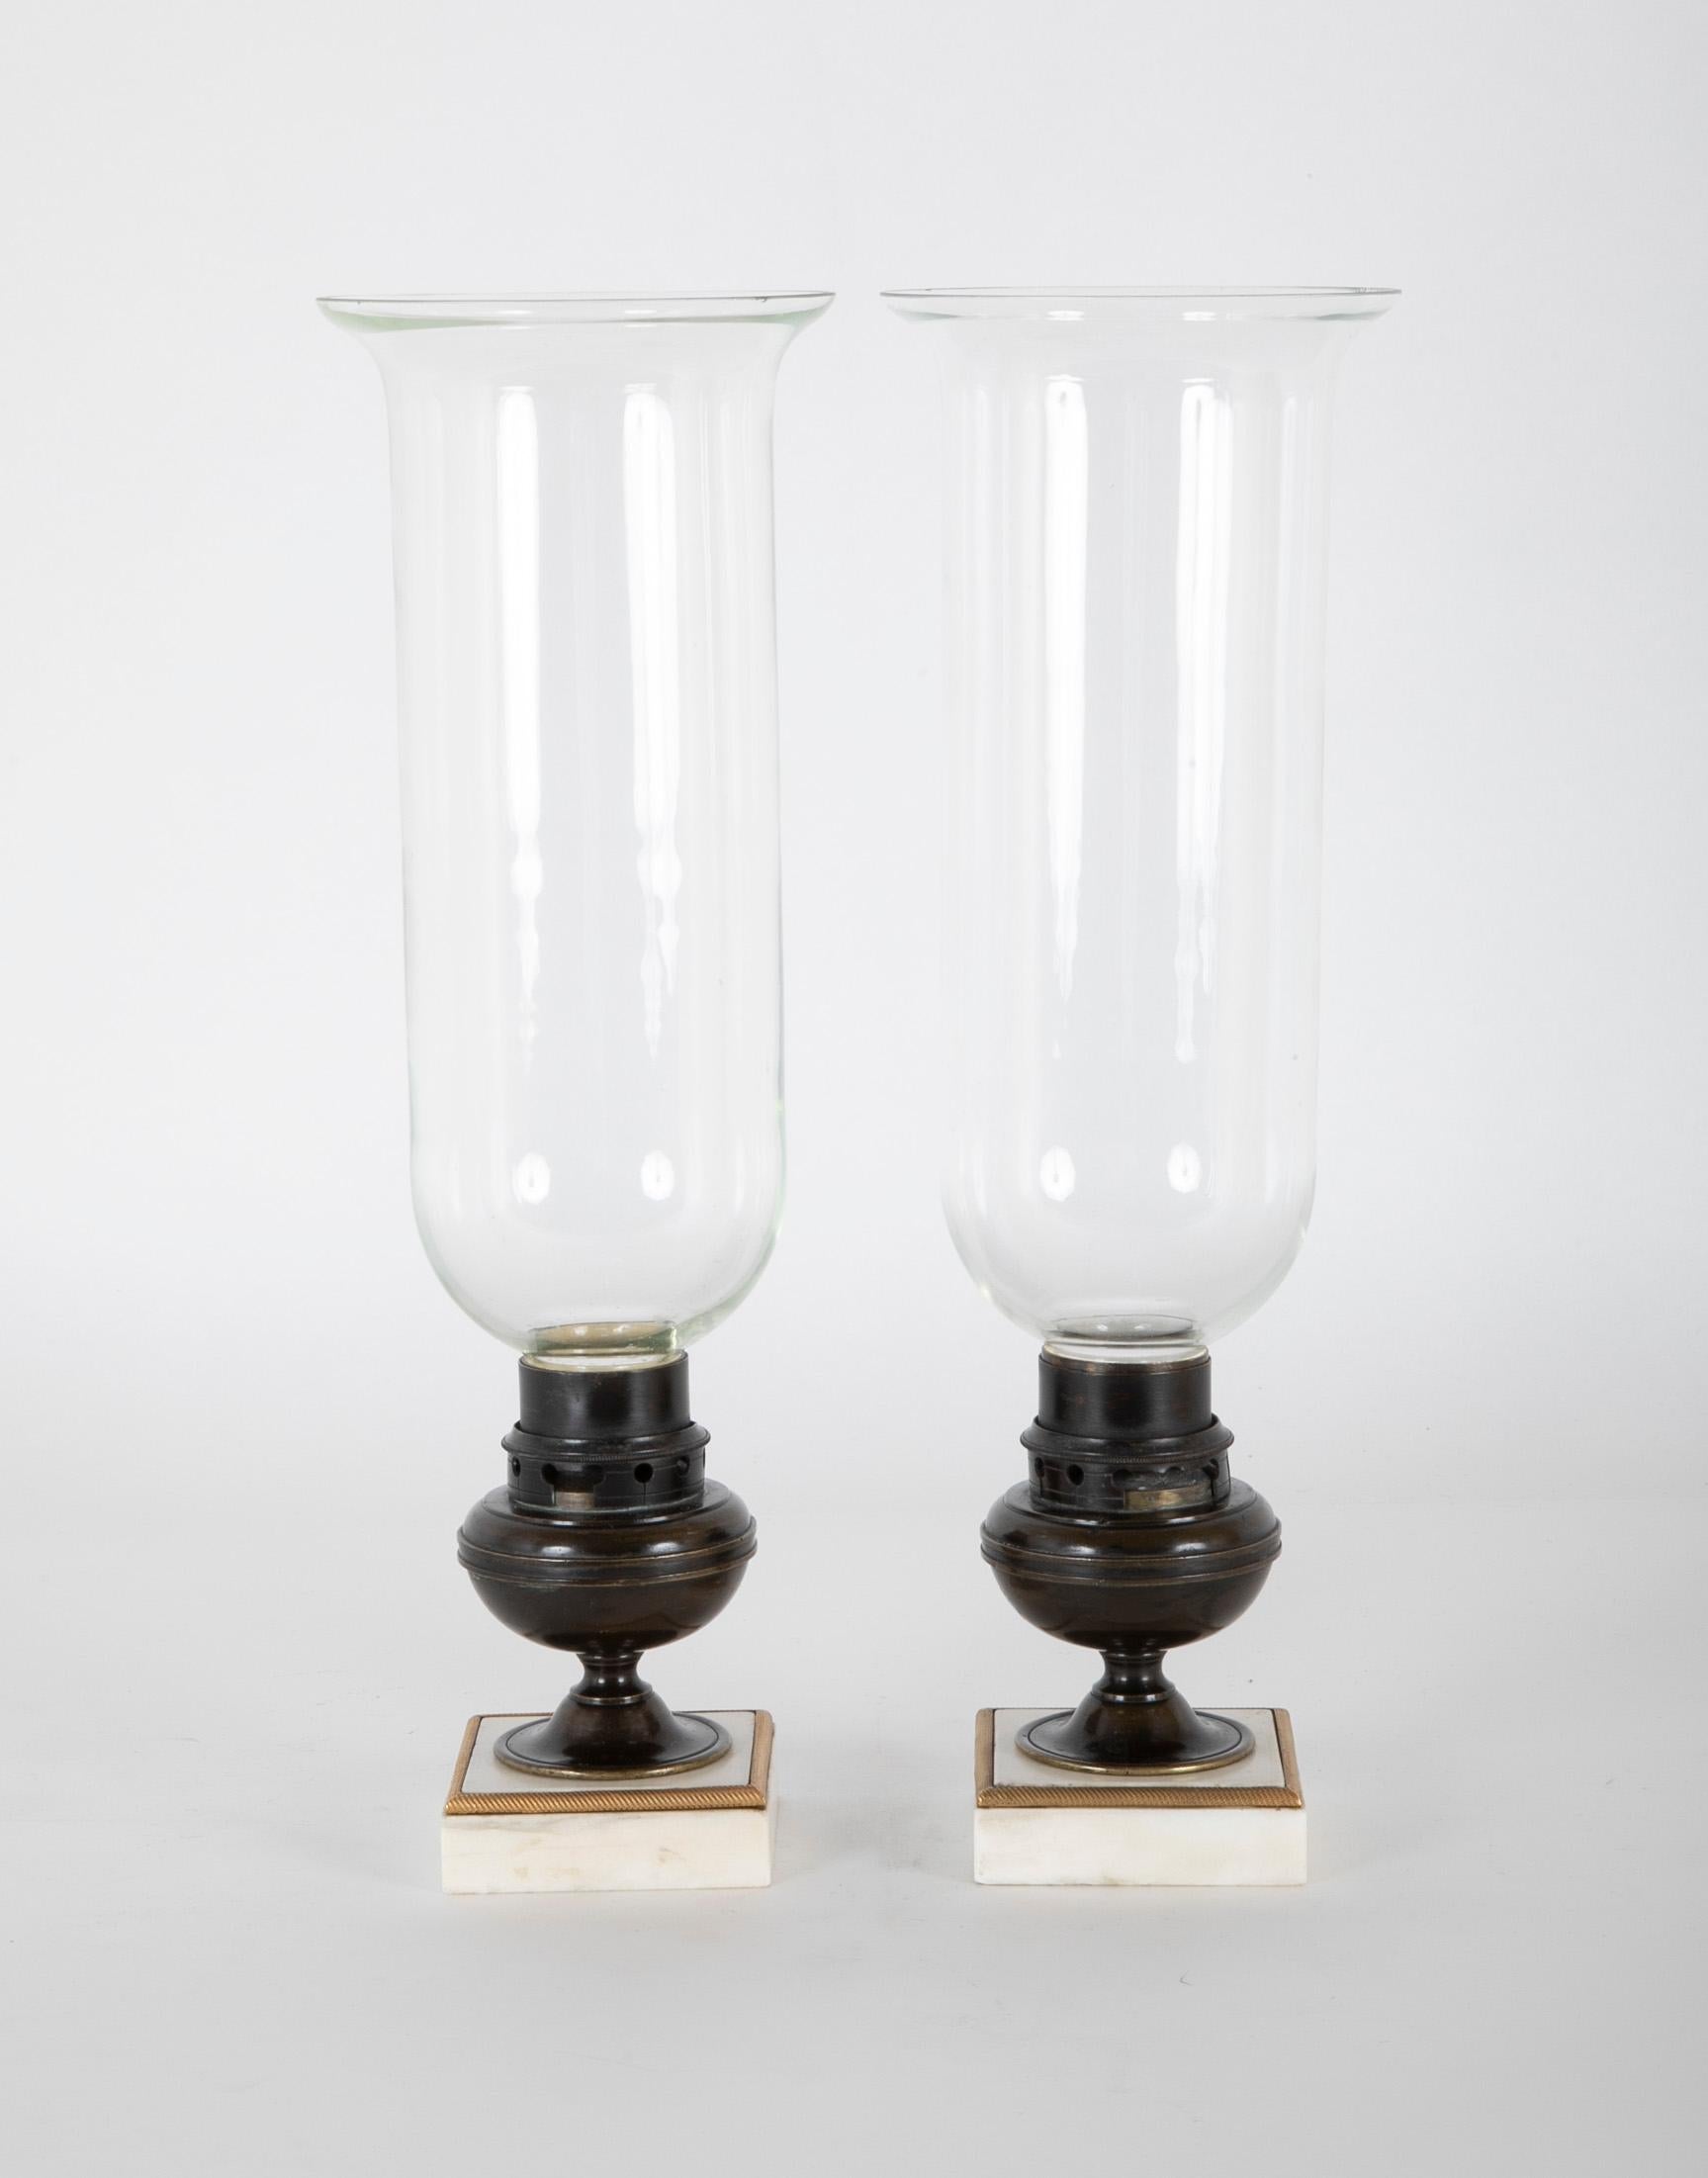 A pair of Regency photophores formerly oil lamps, circa 1840.